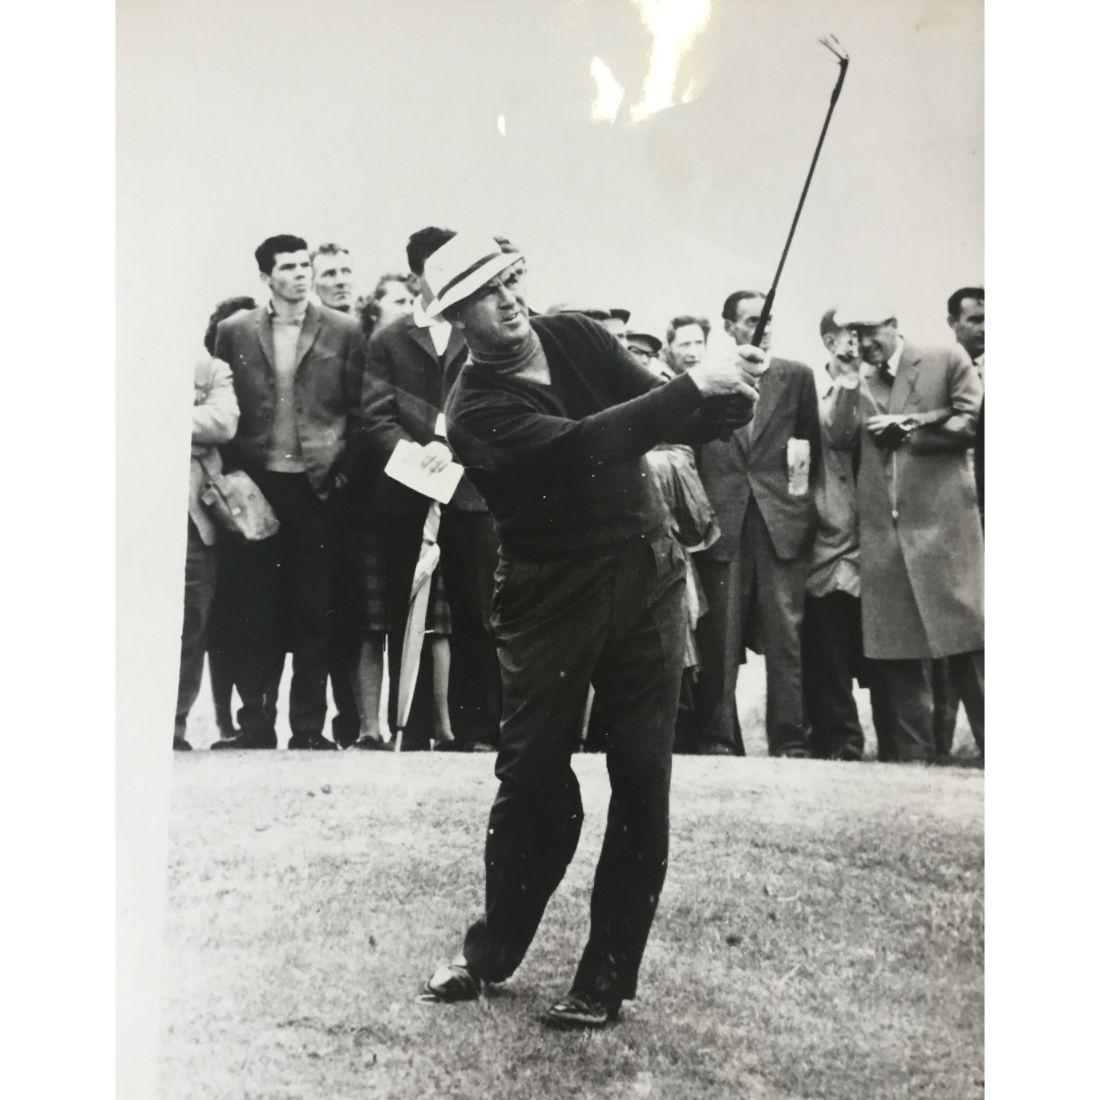 A superb collection of 180+ press photographs of leading golfers from the 1930s to 1990s.

Includes Sam Snead, Arnold Palmer and Gary Player.

Black and white. Mostly 10 x 8 inches.

Many include the photo agency’s stamp on the reverse, as well as a